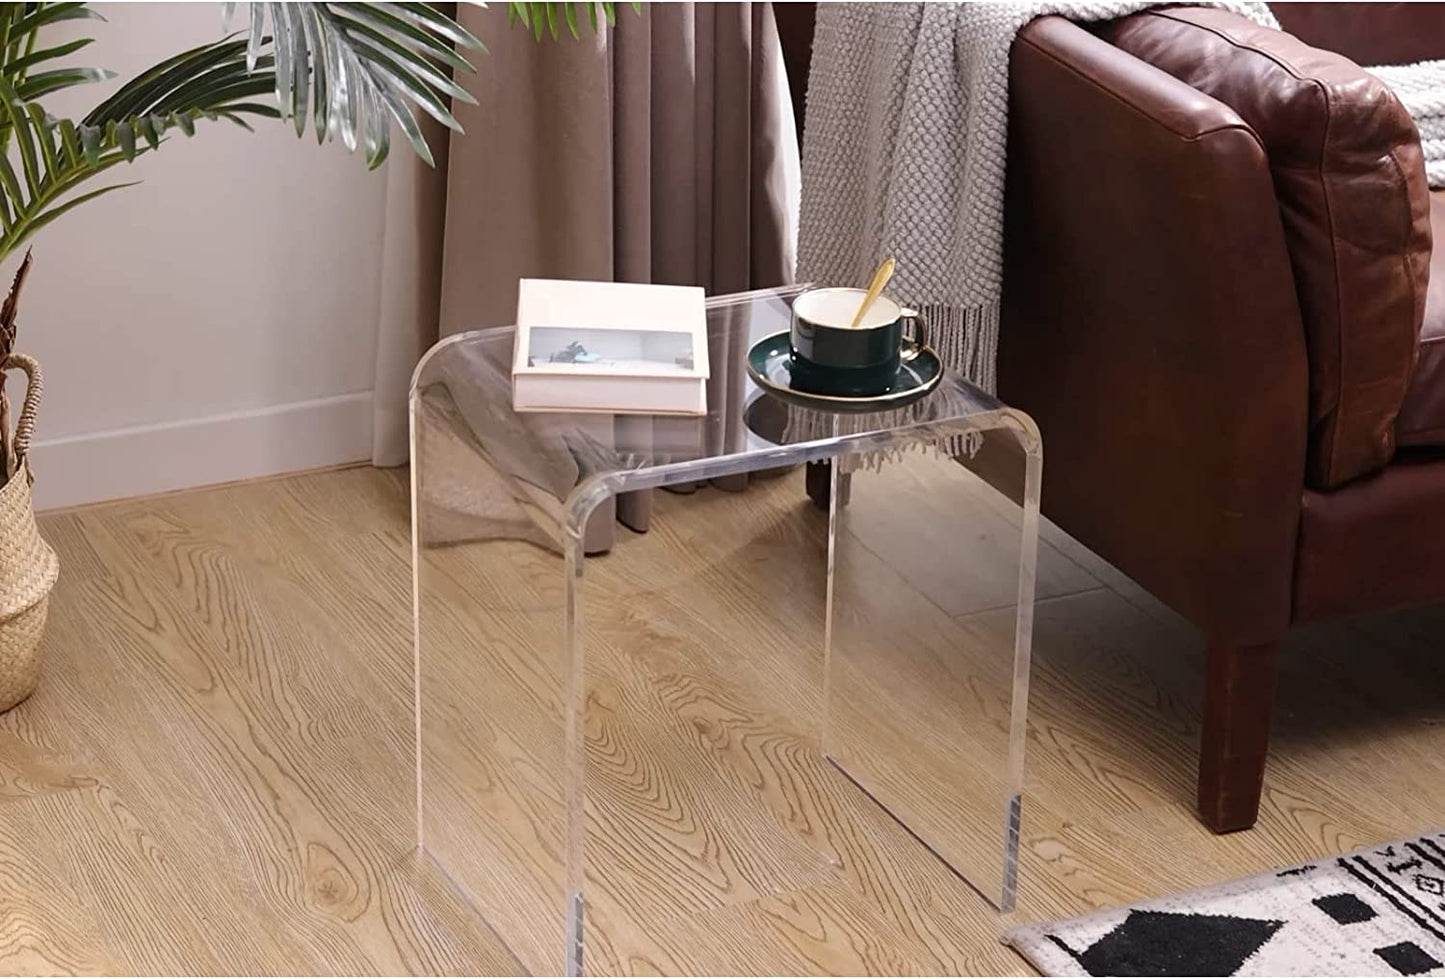 Acrylic End Table, 16" L x 12" W x 18" H Transparent Small Side Table, Acrylic Side Table Clear Nightstand and Stool for Home Office